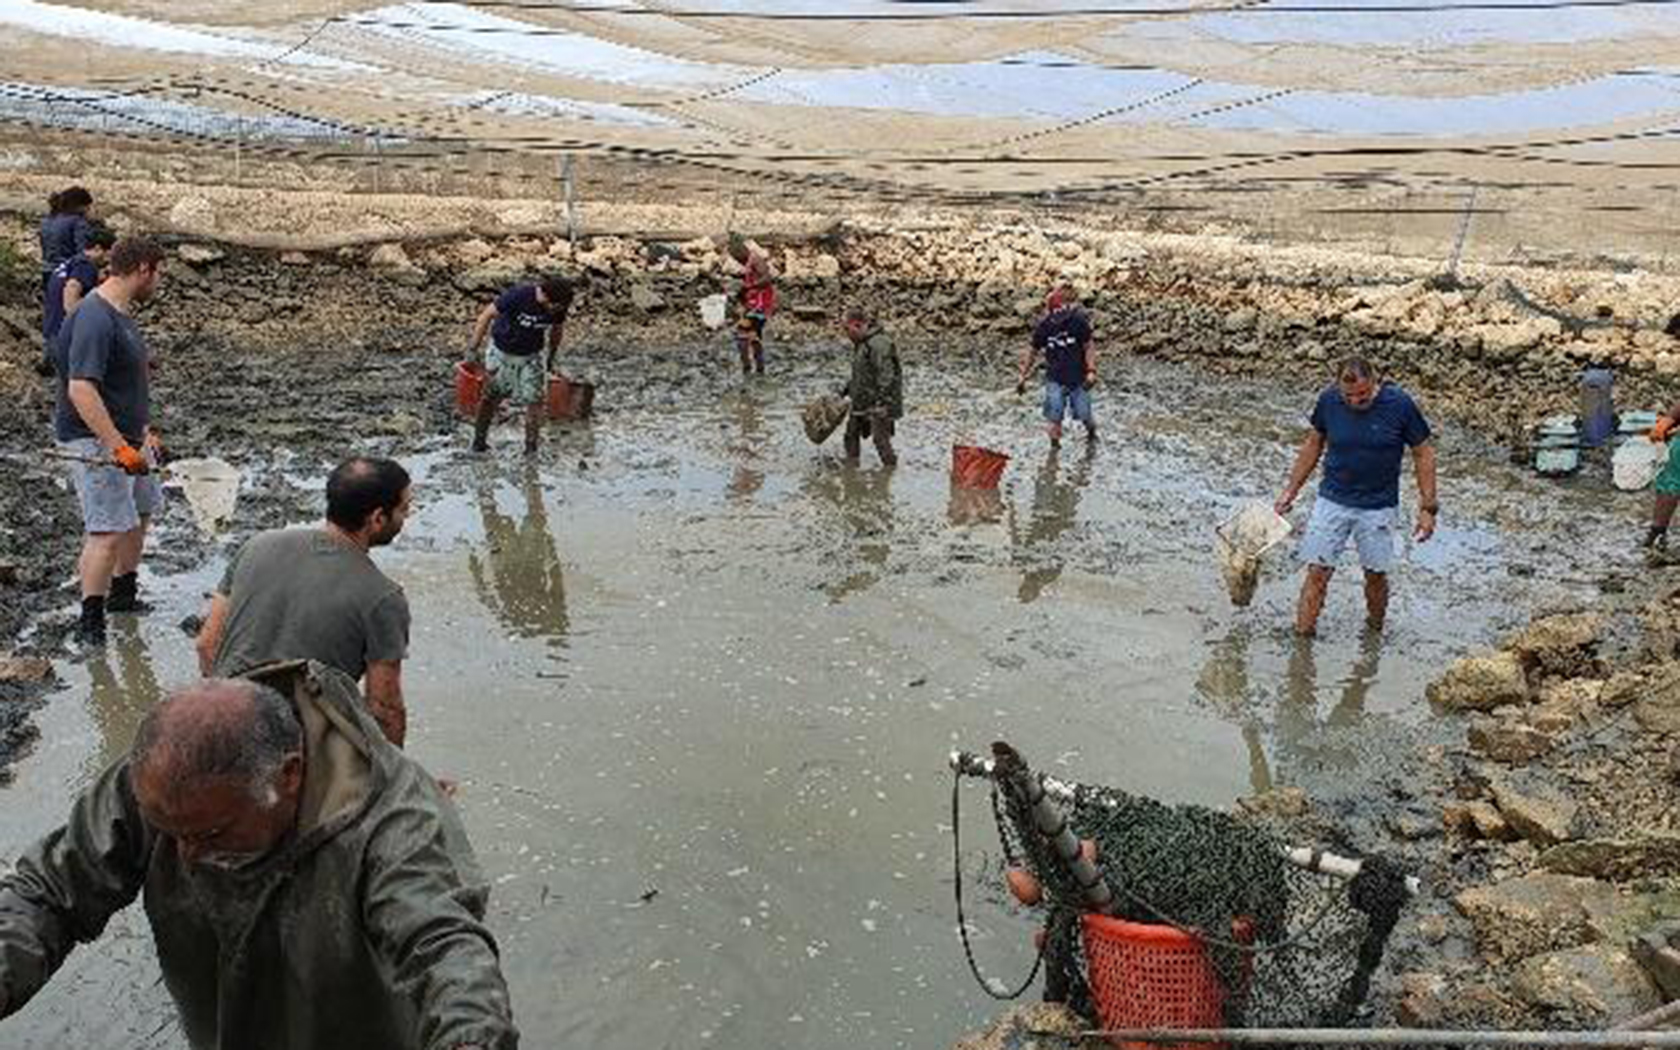 Collecting prawns at Dor Aquaculture Research Station